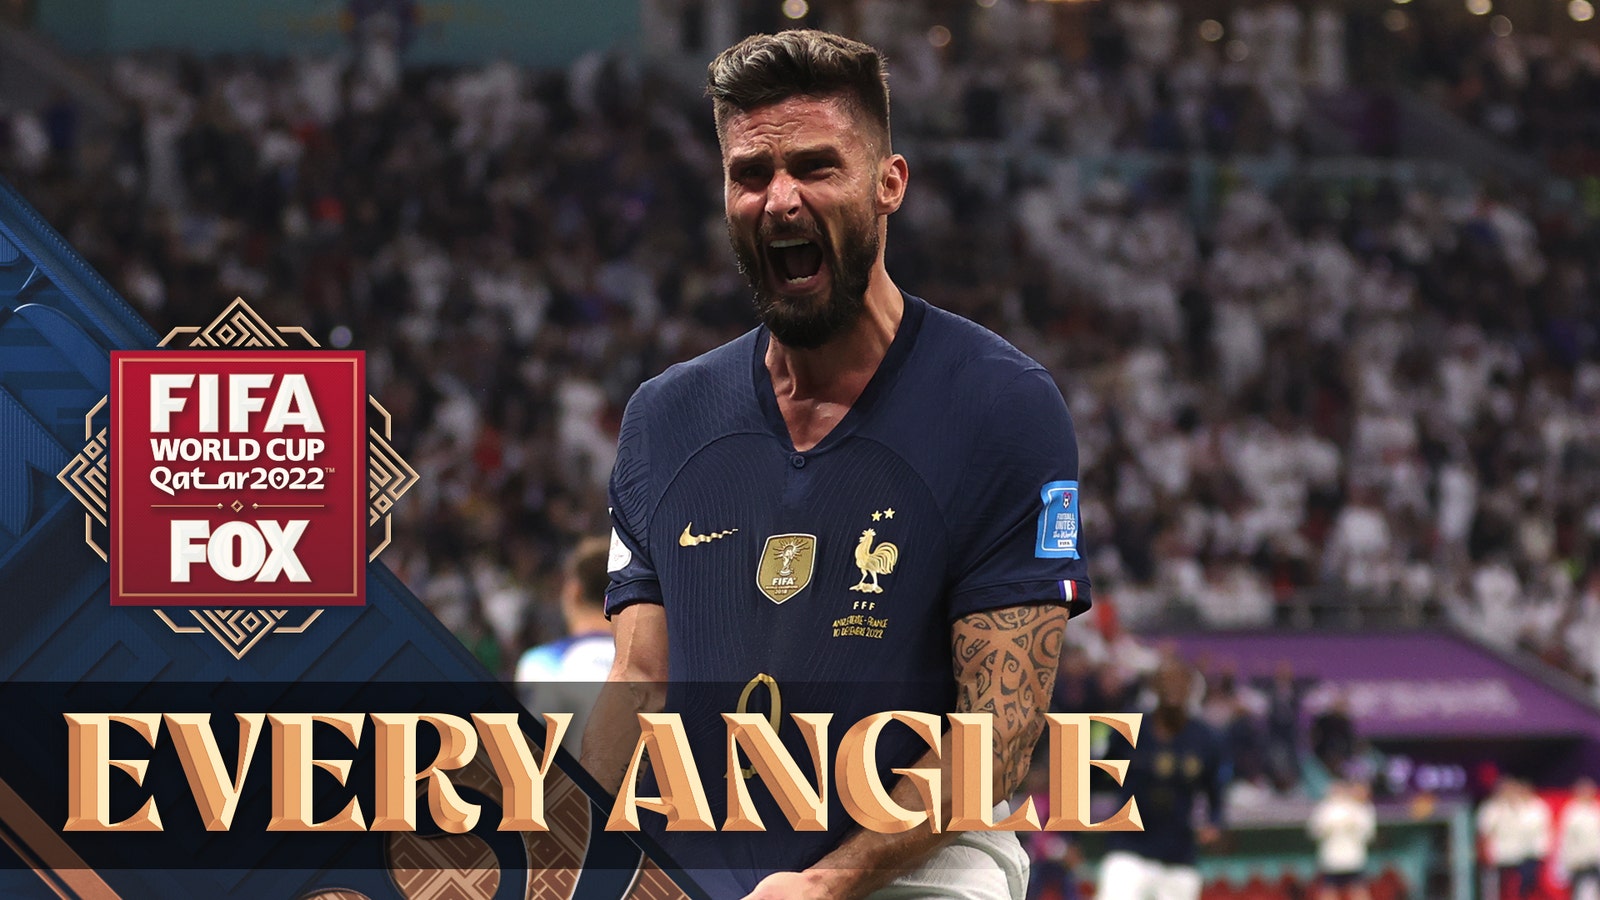 Olivier Giroud hit the header to give France an incredible win at the 2022 FIFA World Cup | All angles